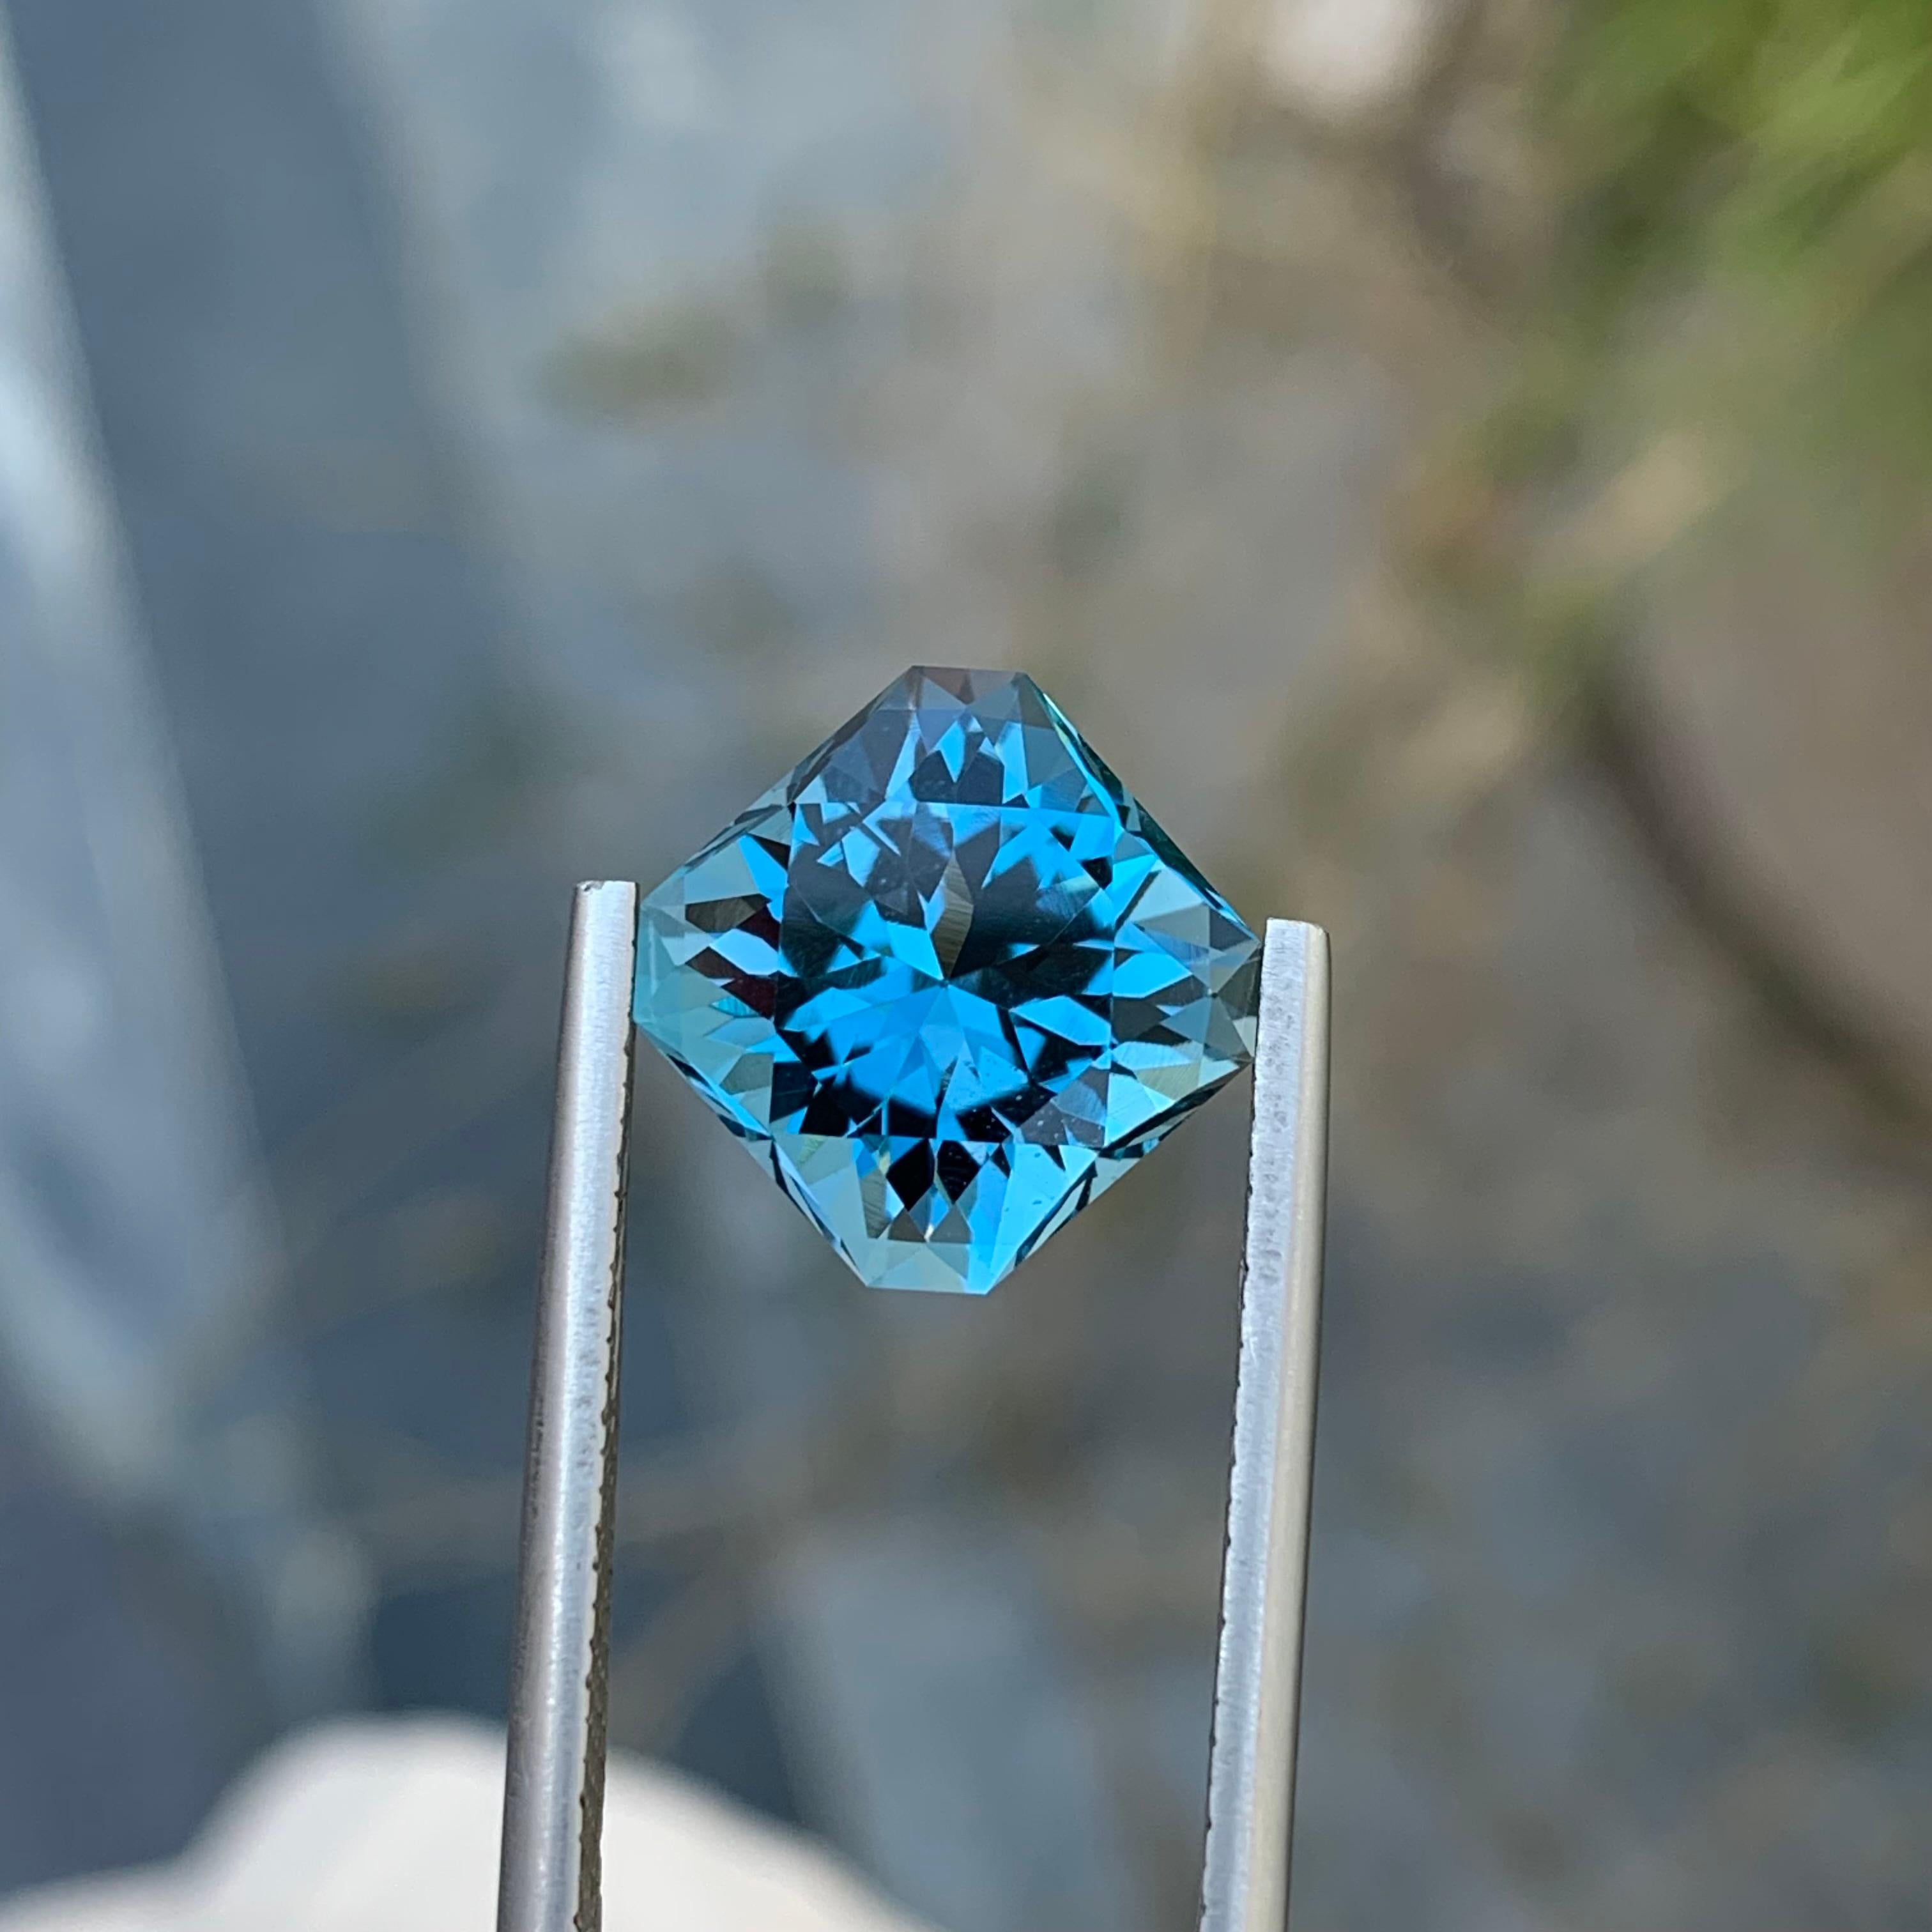 Arts and Crafts Perfect Square Shape 8.20 Carats Fancy Cut Loose London Blue Topaz Gem For Ring  For Sale